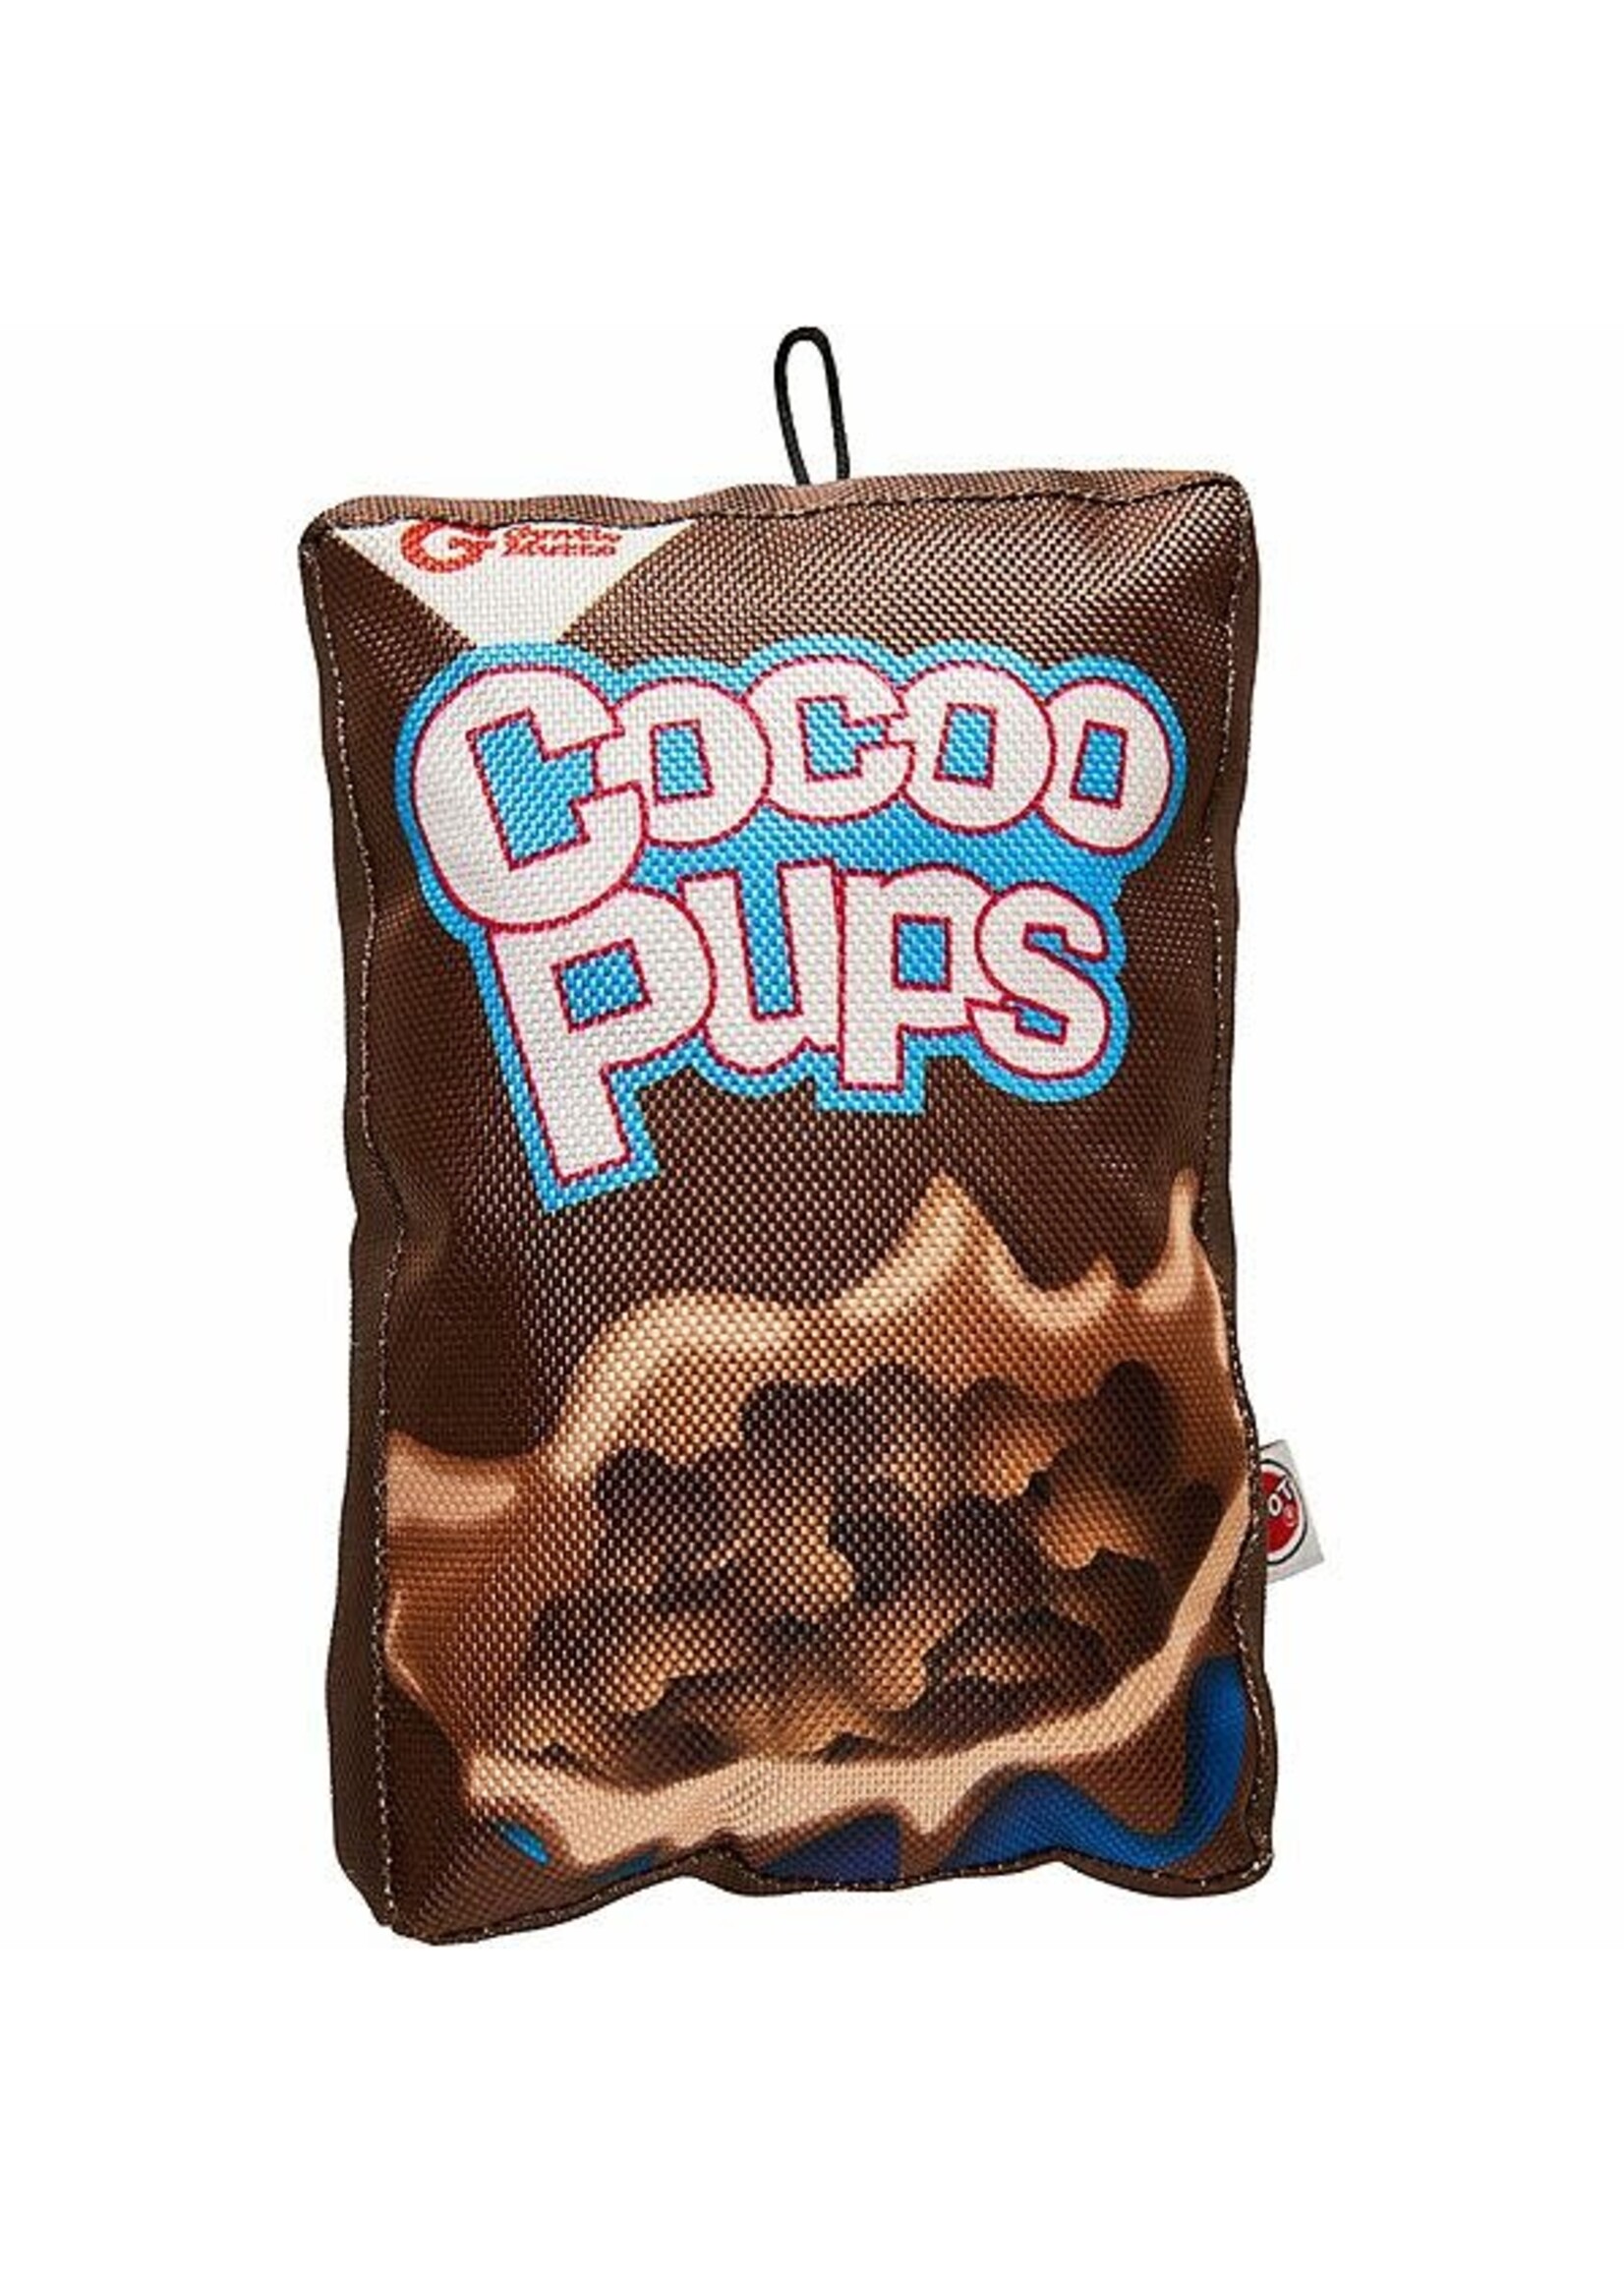 Ethical Ethical Fun Food Coco Pups